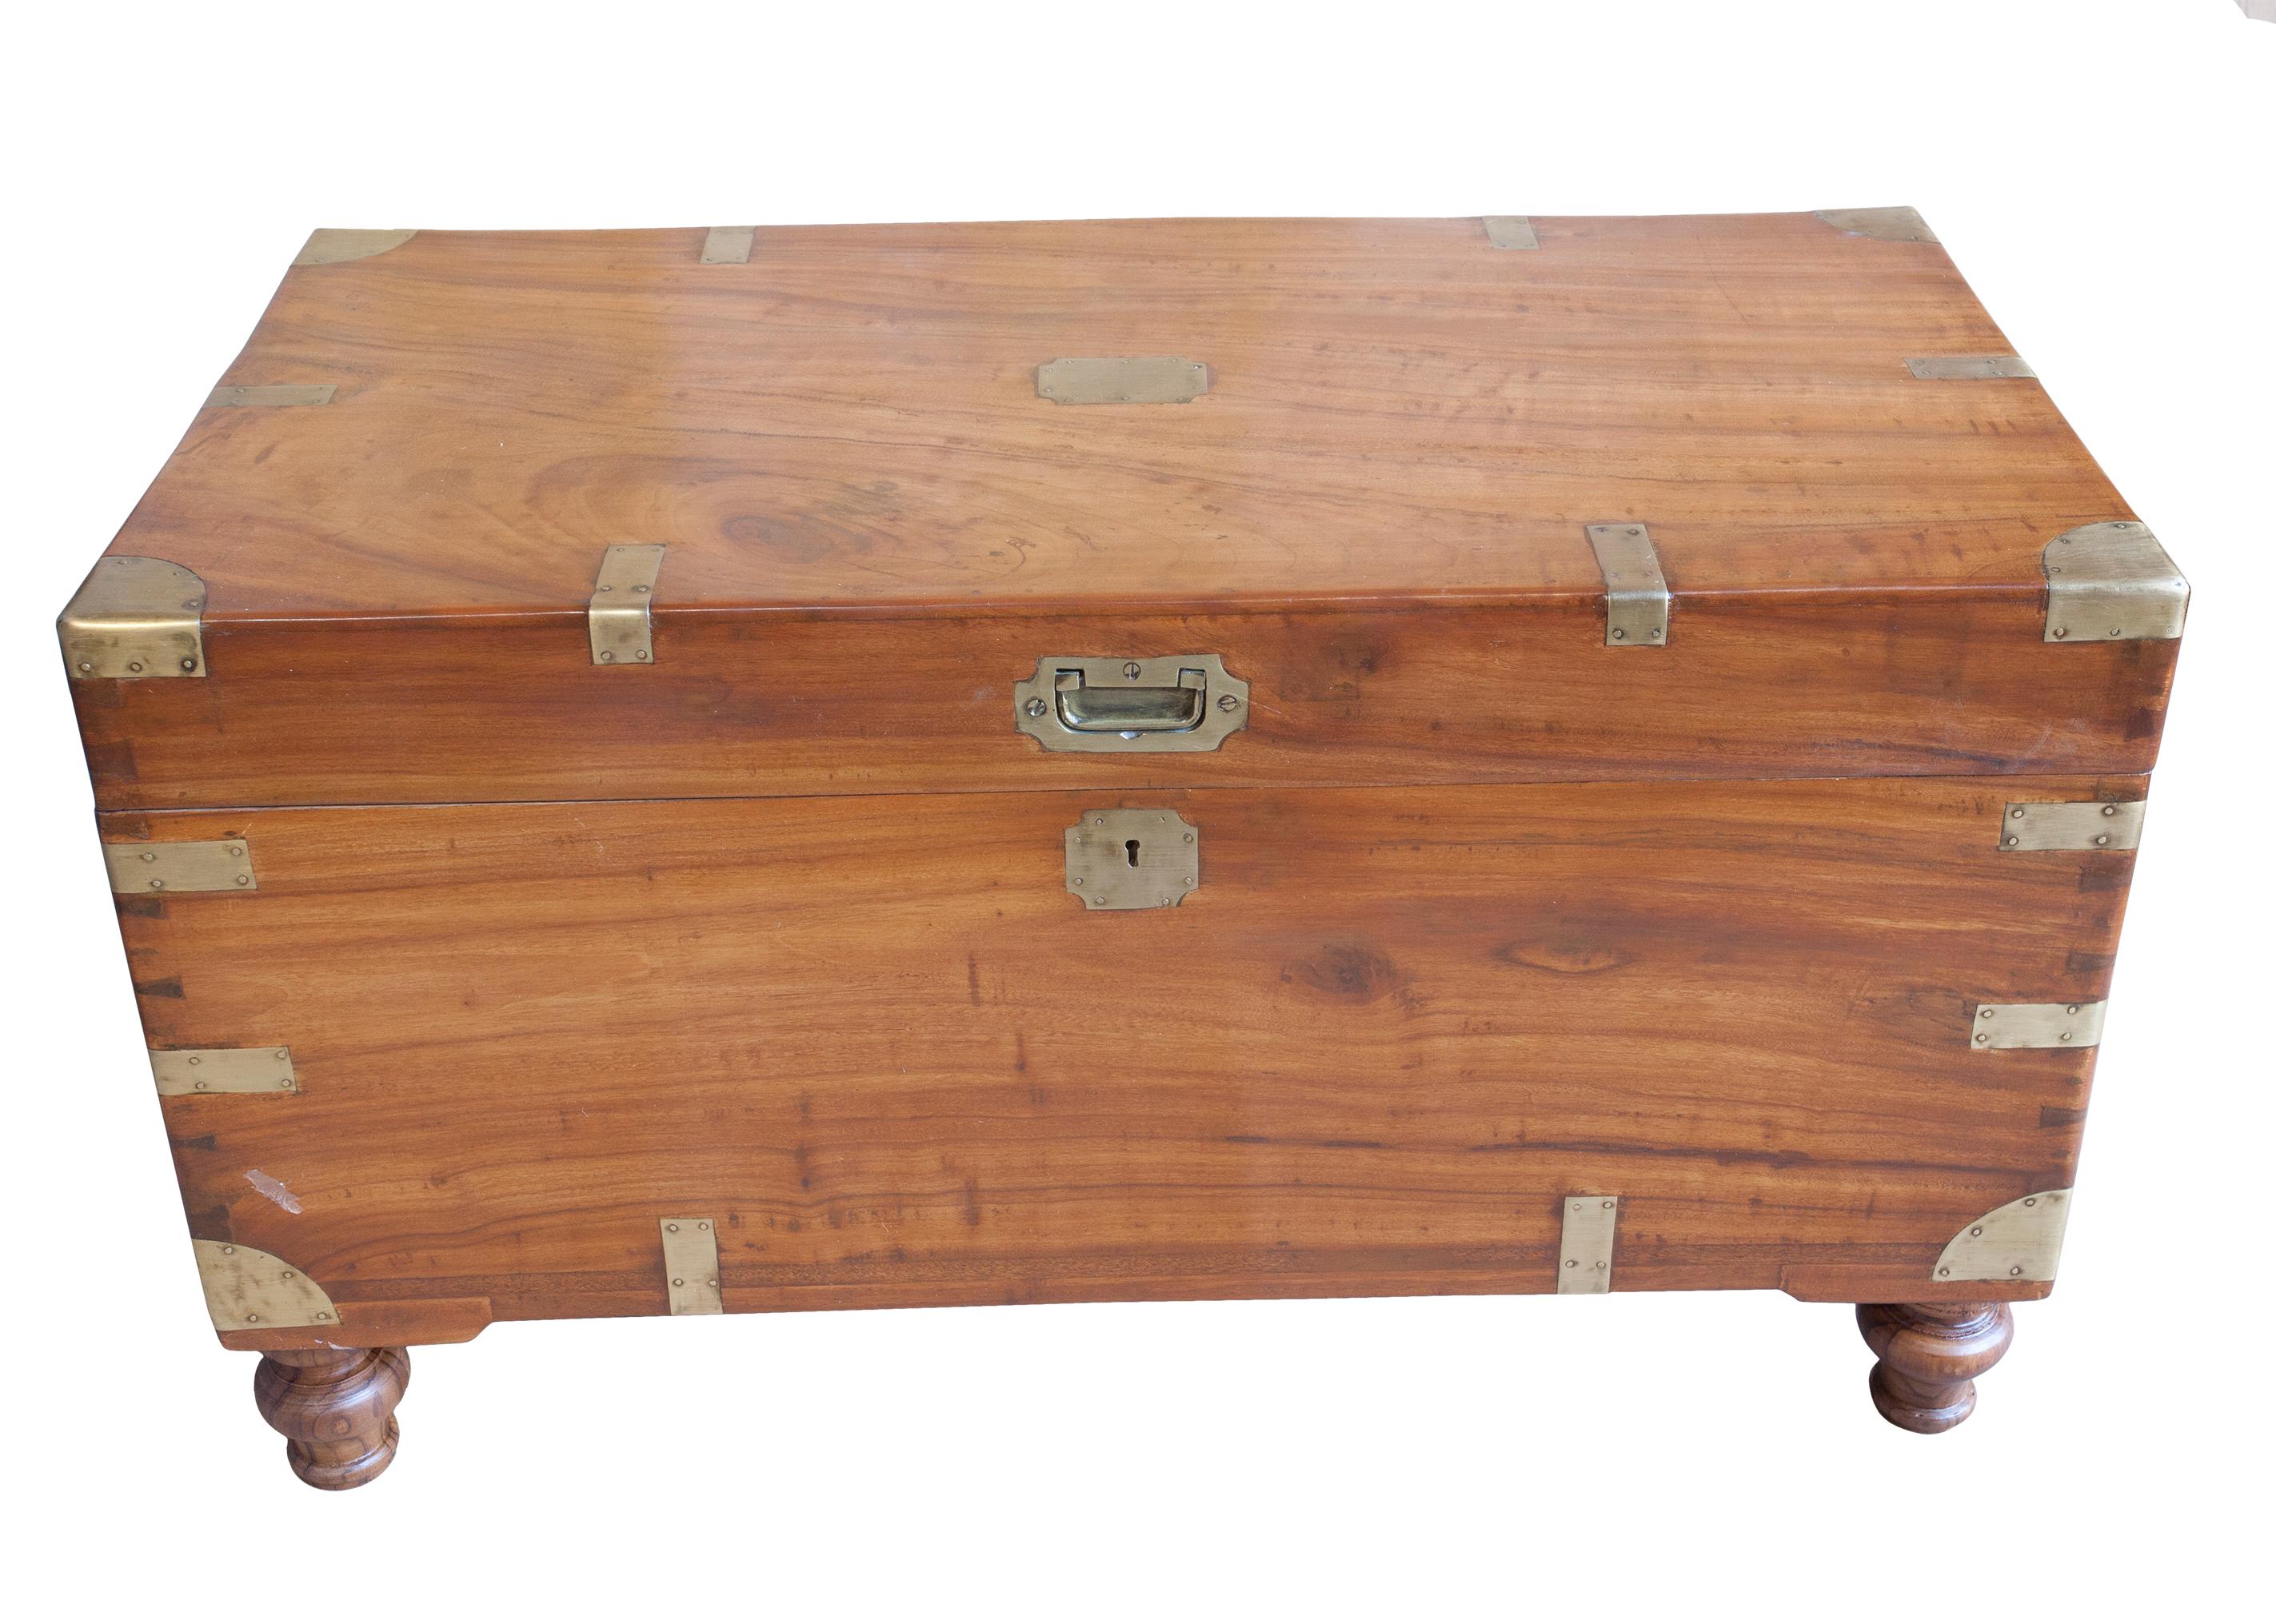 Classic British campaign camphor wood sea chest. Brass straps and handles, recessed brass pull and escutcheon with working lock and key. Feet were added to accommodate use as a coffee table (keeps your feet from hitting the box). Still has its